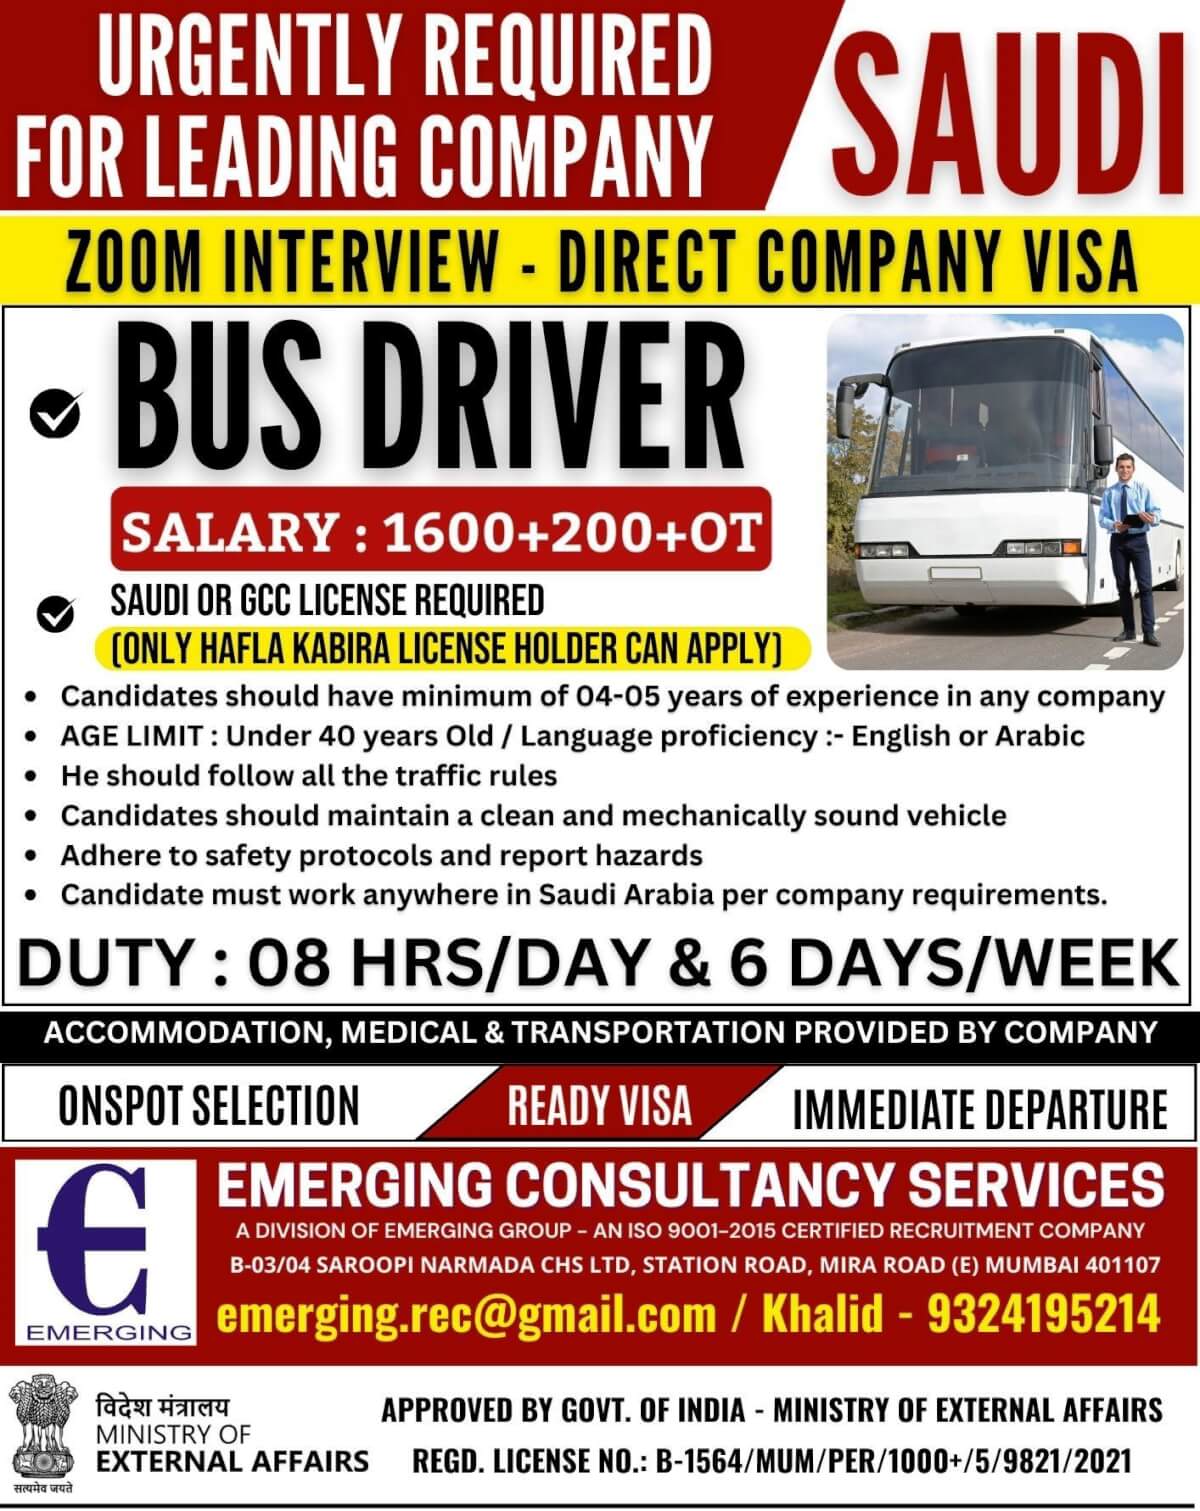 URGENTLY REQUIRED FOR LEADING COMPANY  IN SAUDI ARABIA - ZOOM INTERVIEW - DIRECT COMPANY VISA